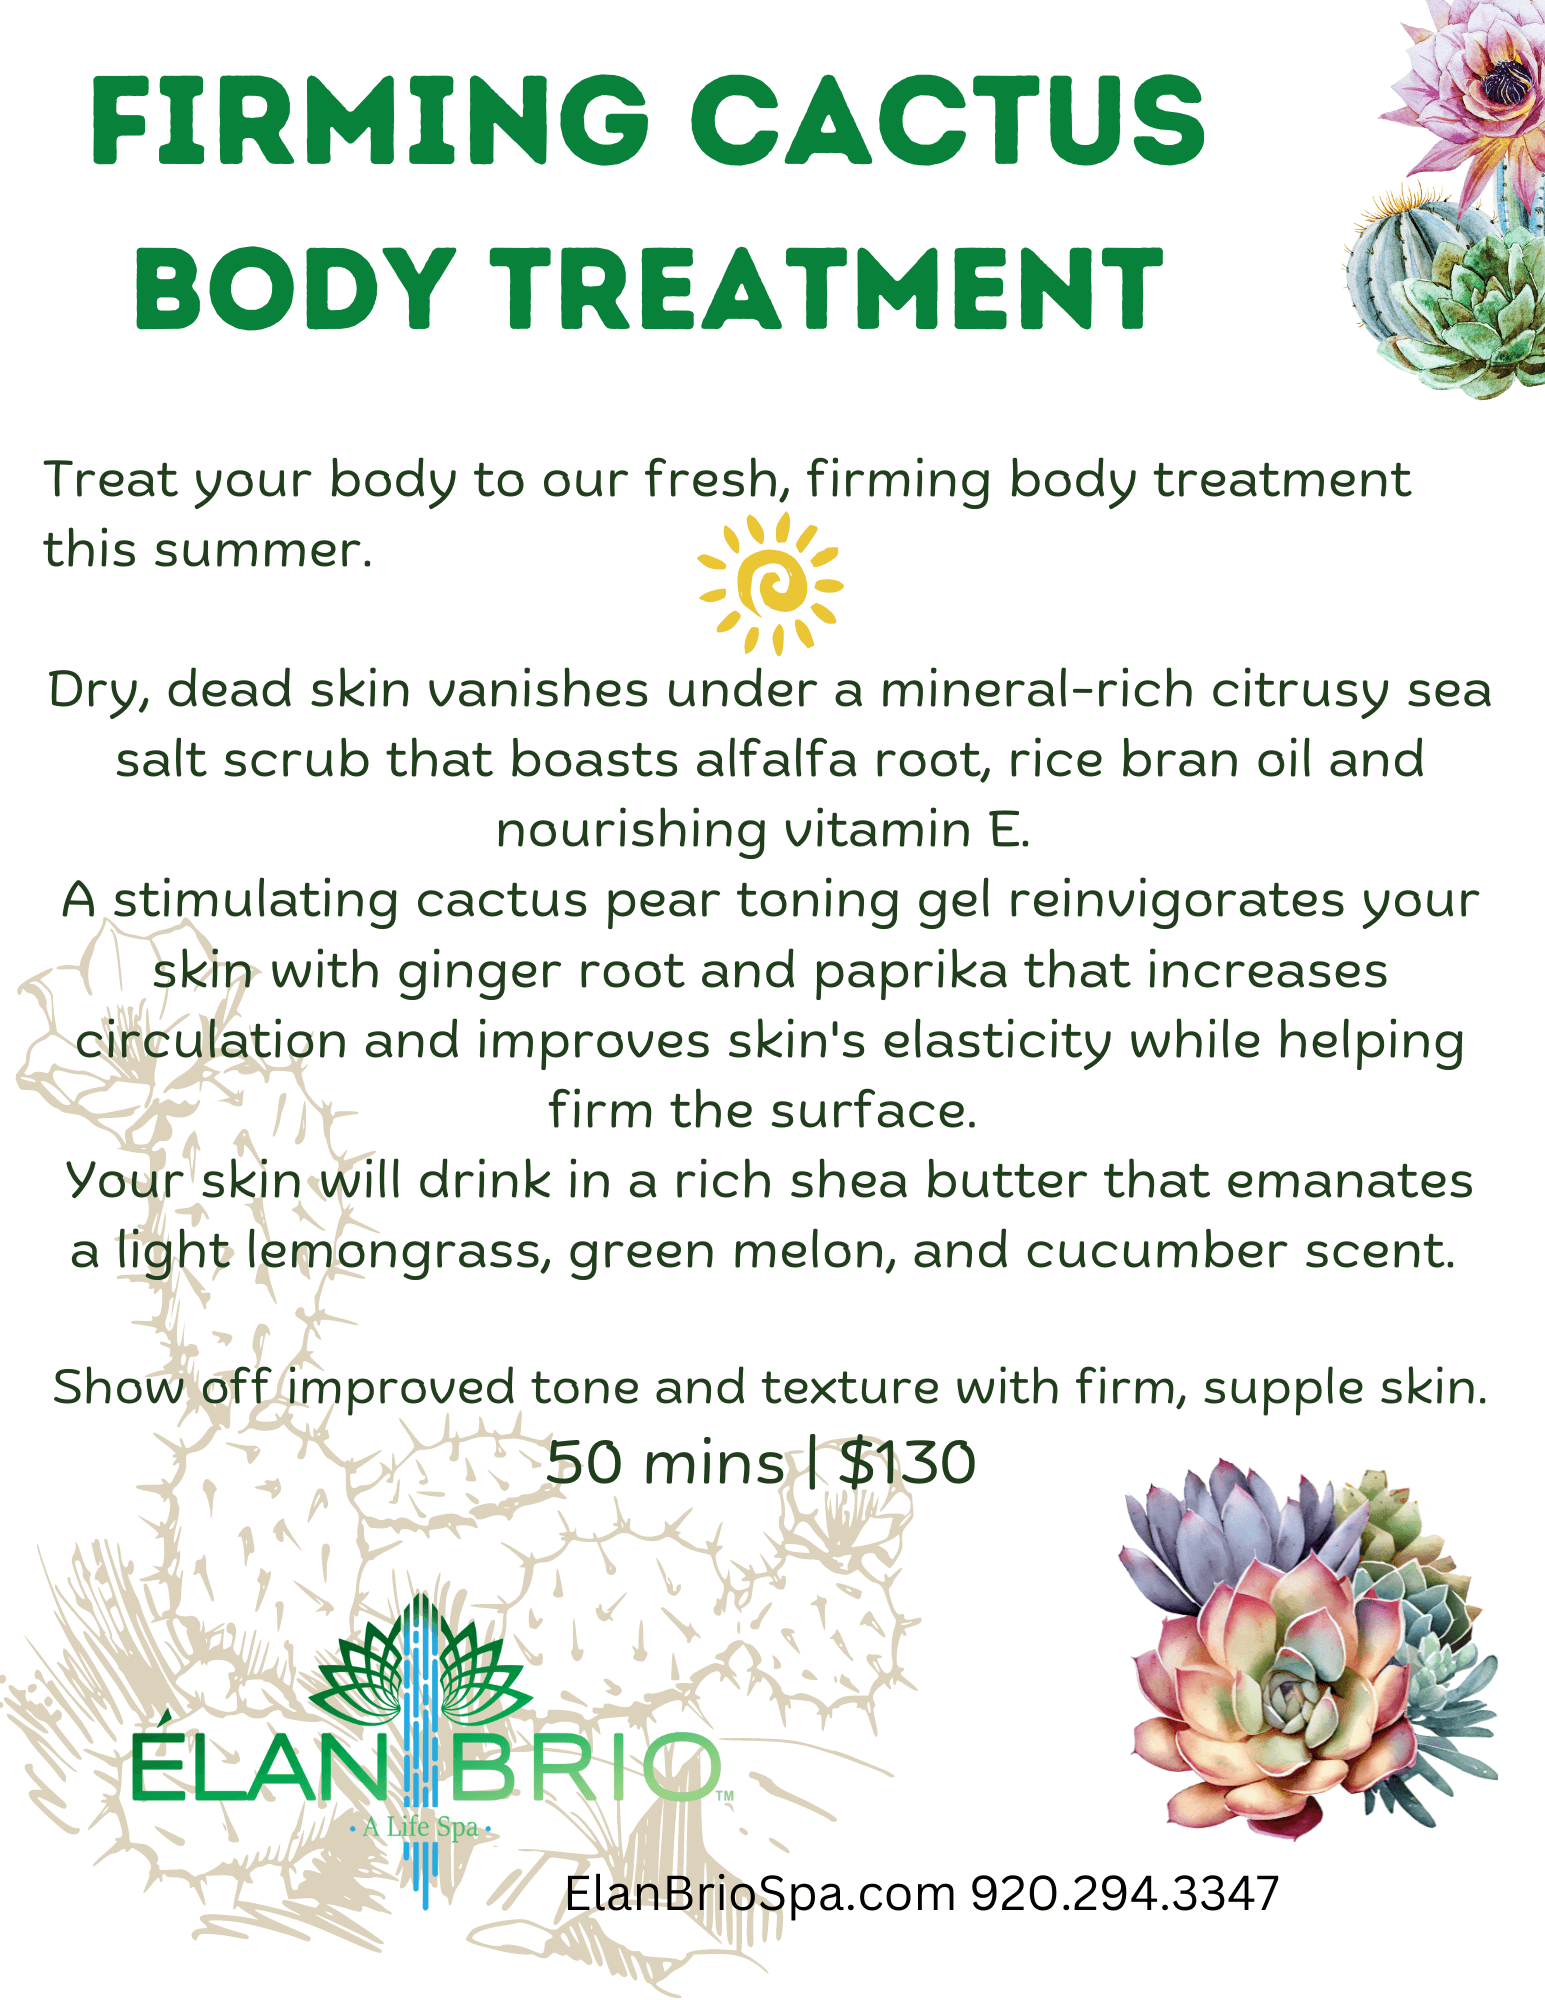 Firming Cactus Body Treatment